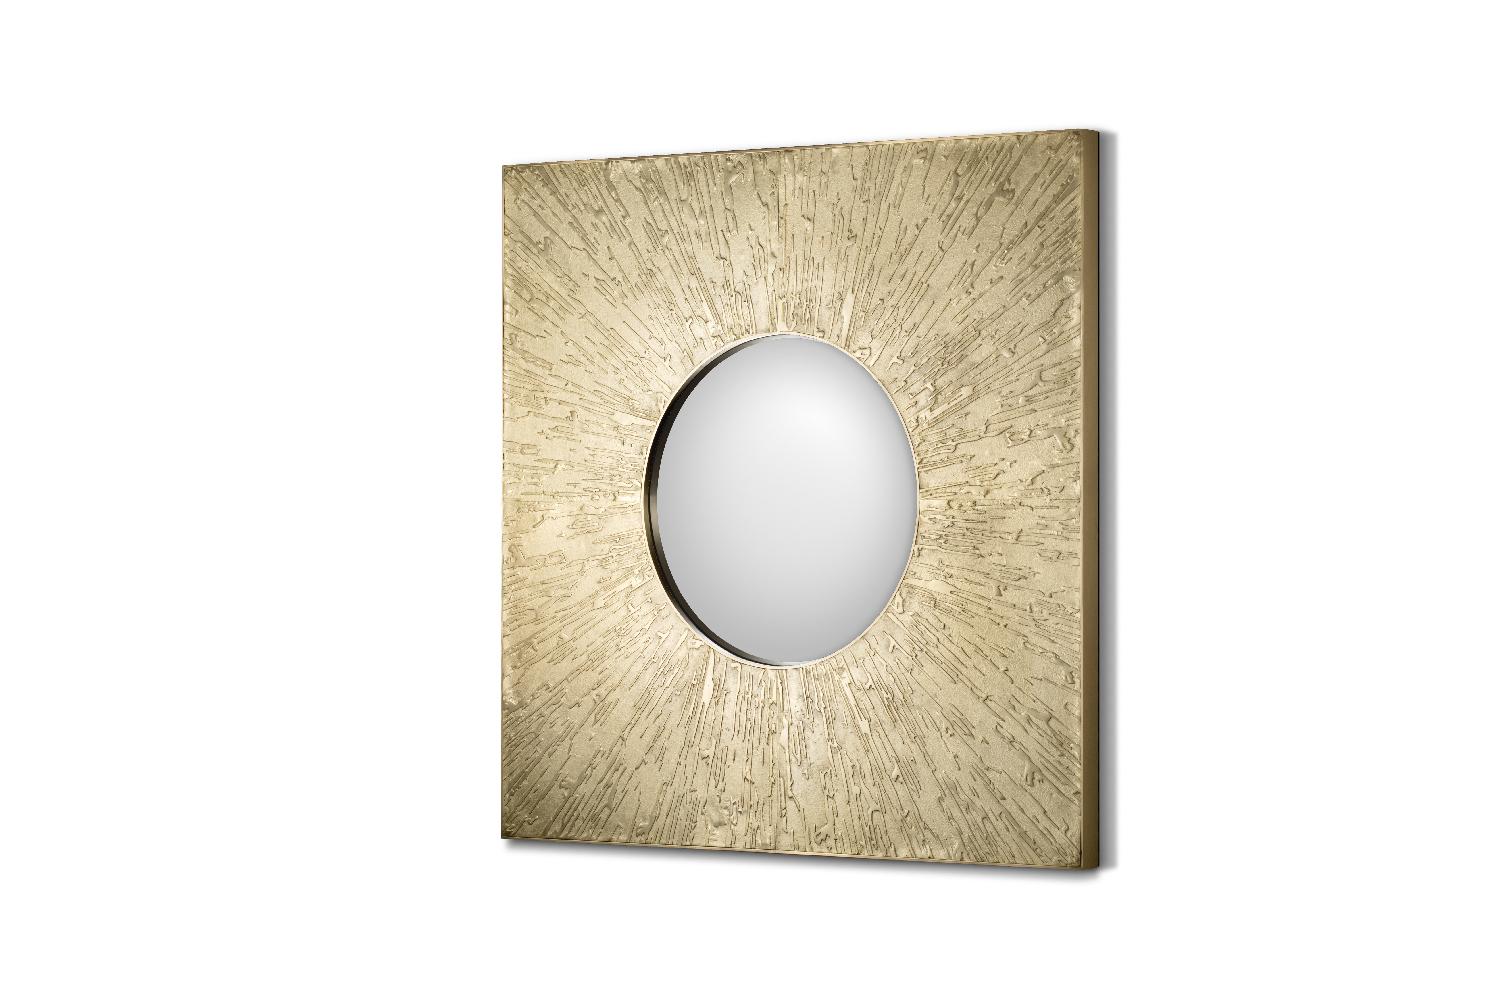 Huli is a tribe from Papua New Guinea known for painting their faces yellow, red and white to impress the enemy. This ritual was the inspiration behind Huli square mirror, made of matte casted brass. More than a wall mirror, it is a decorative item